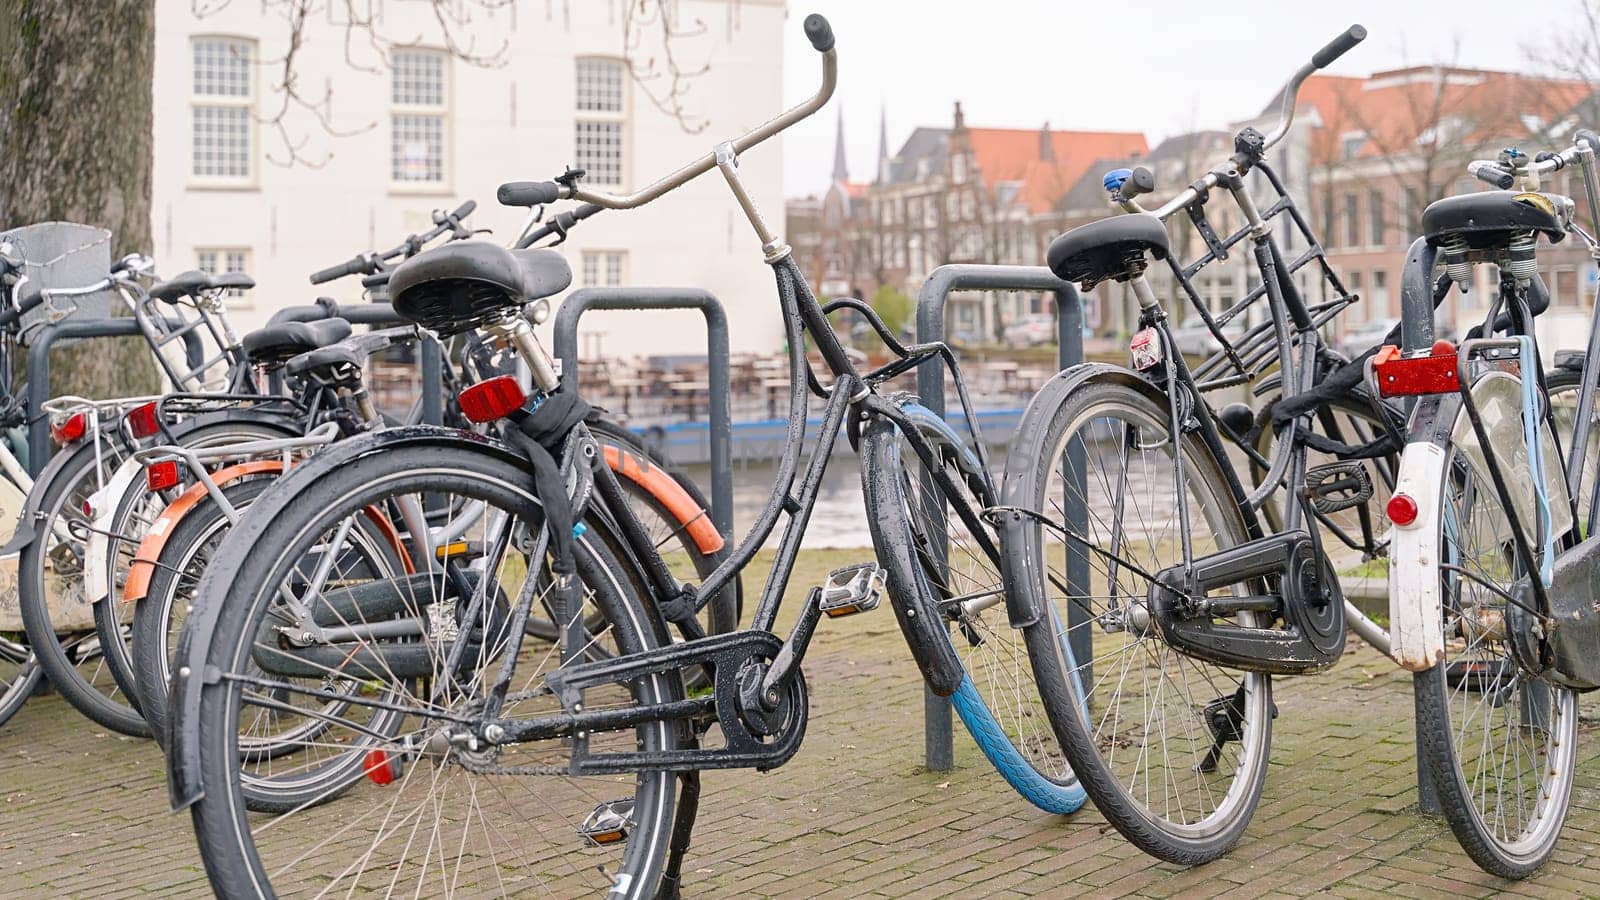 Delft, Netherlands. Bicycles parked alongside a channel on beautiful old buildings background. by berezko